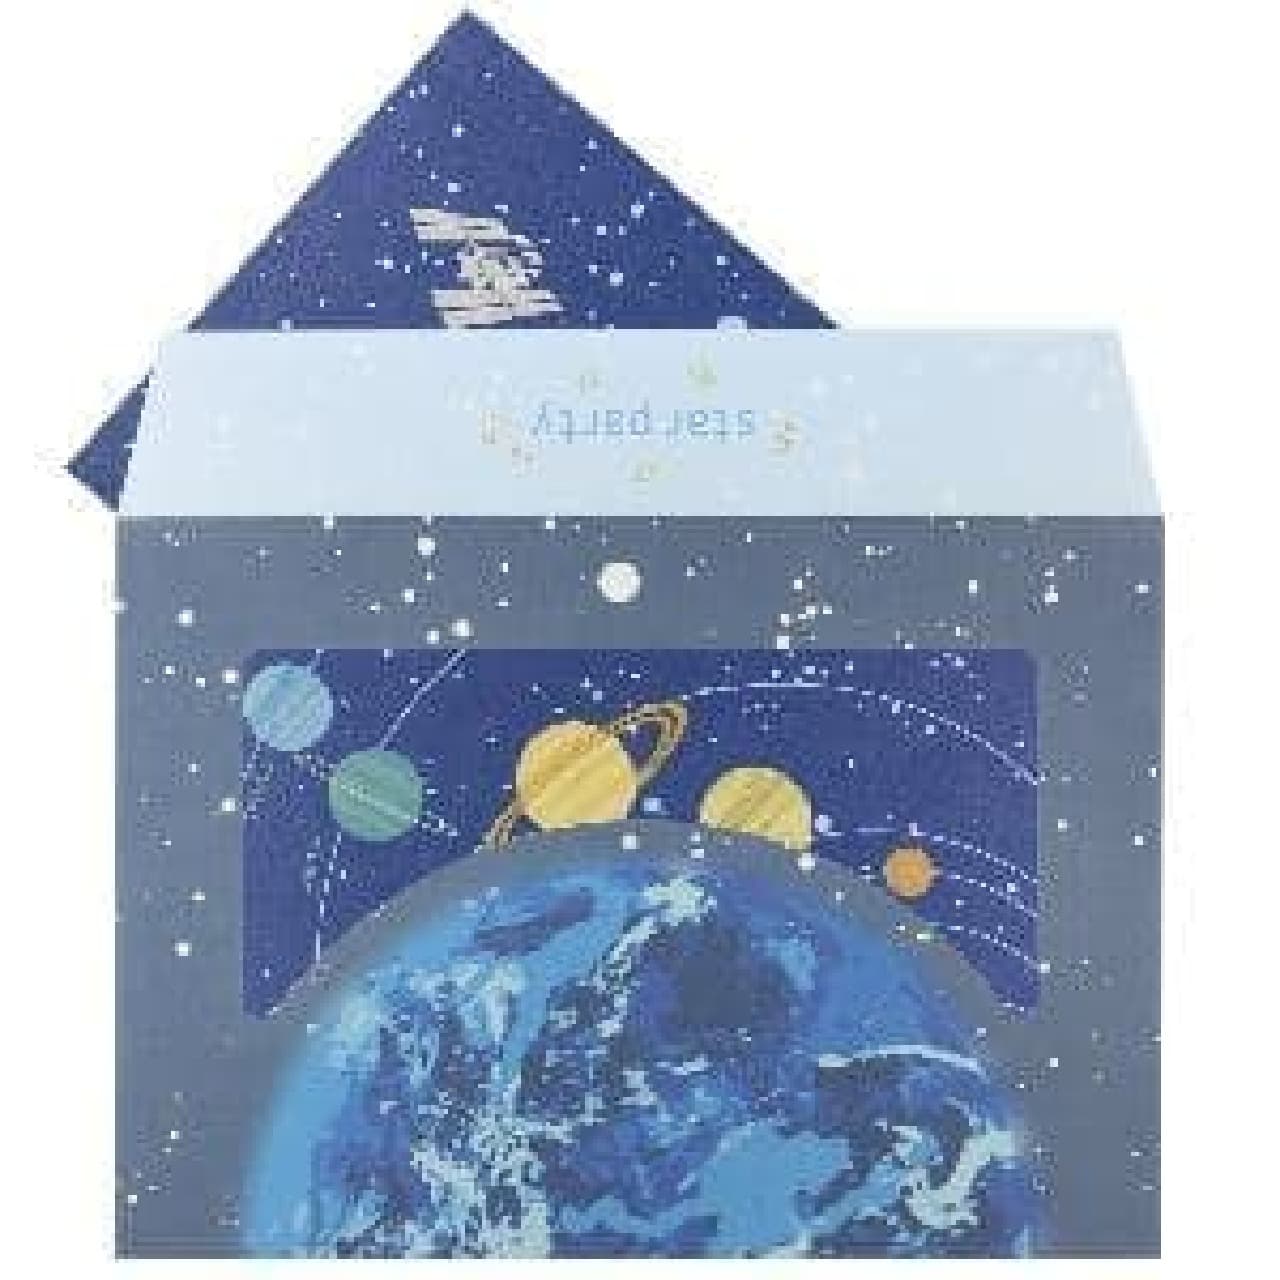 Vixen letter set and schedule sticker designed for celestial bodies and starry sky